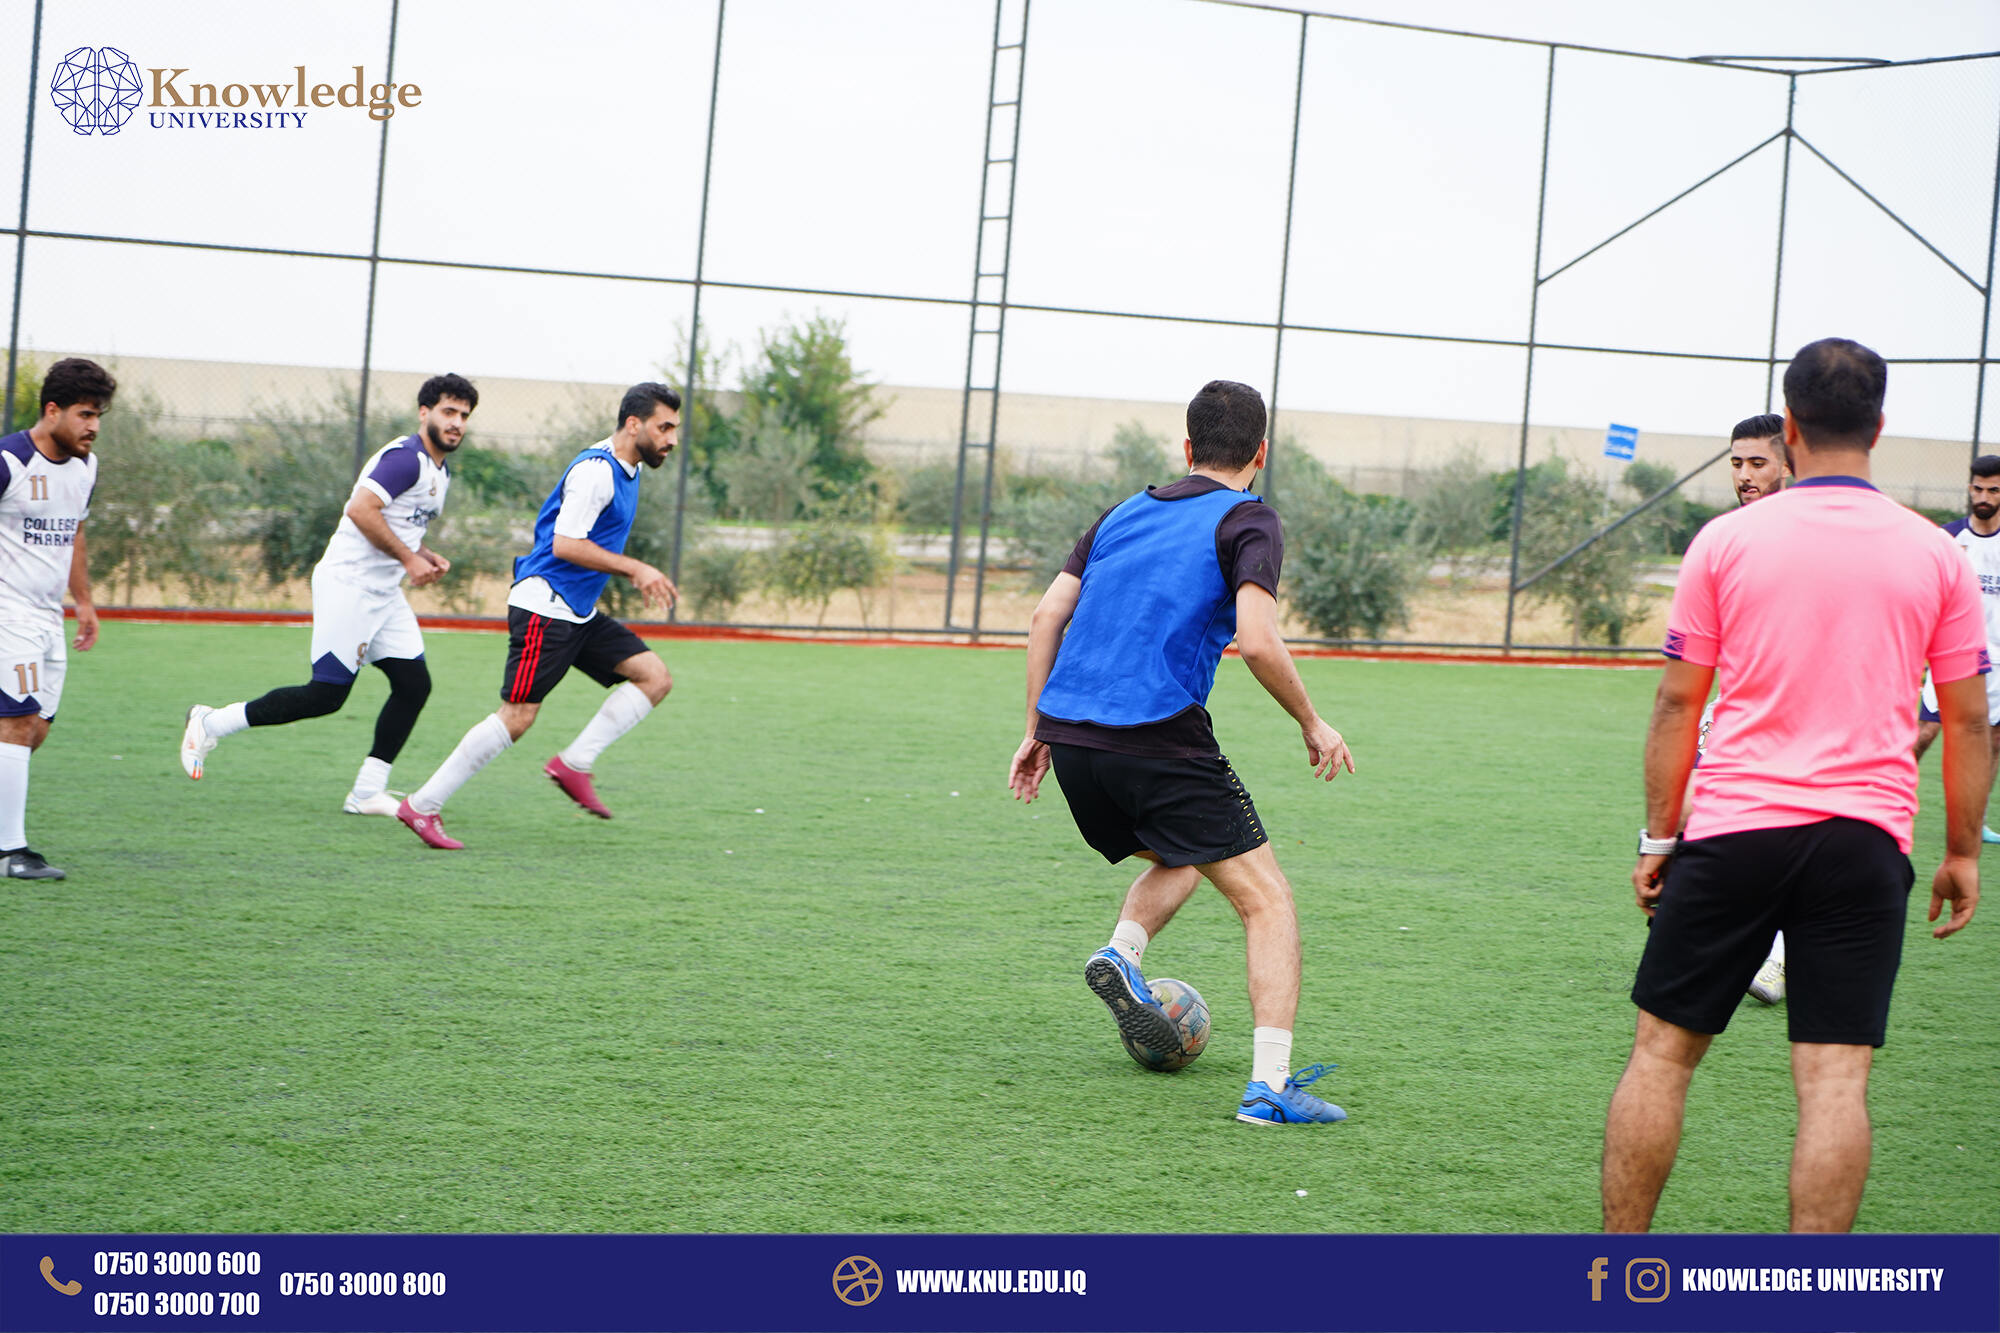 Third Stages Seize Victory in College of Pharmacy Football Tournament >